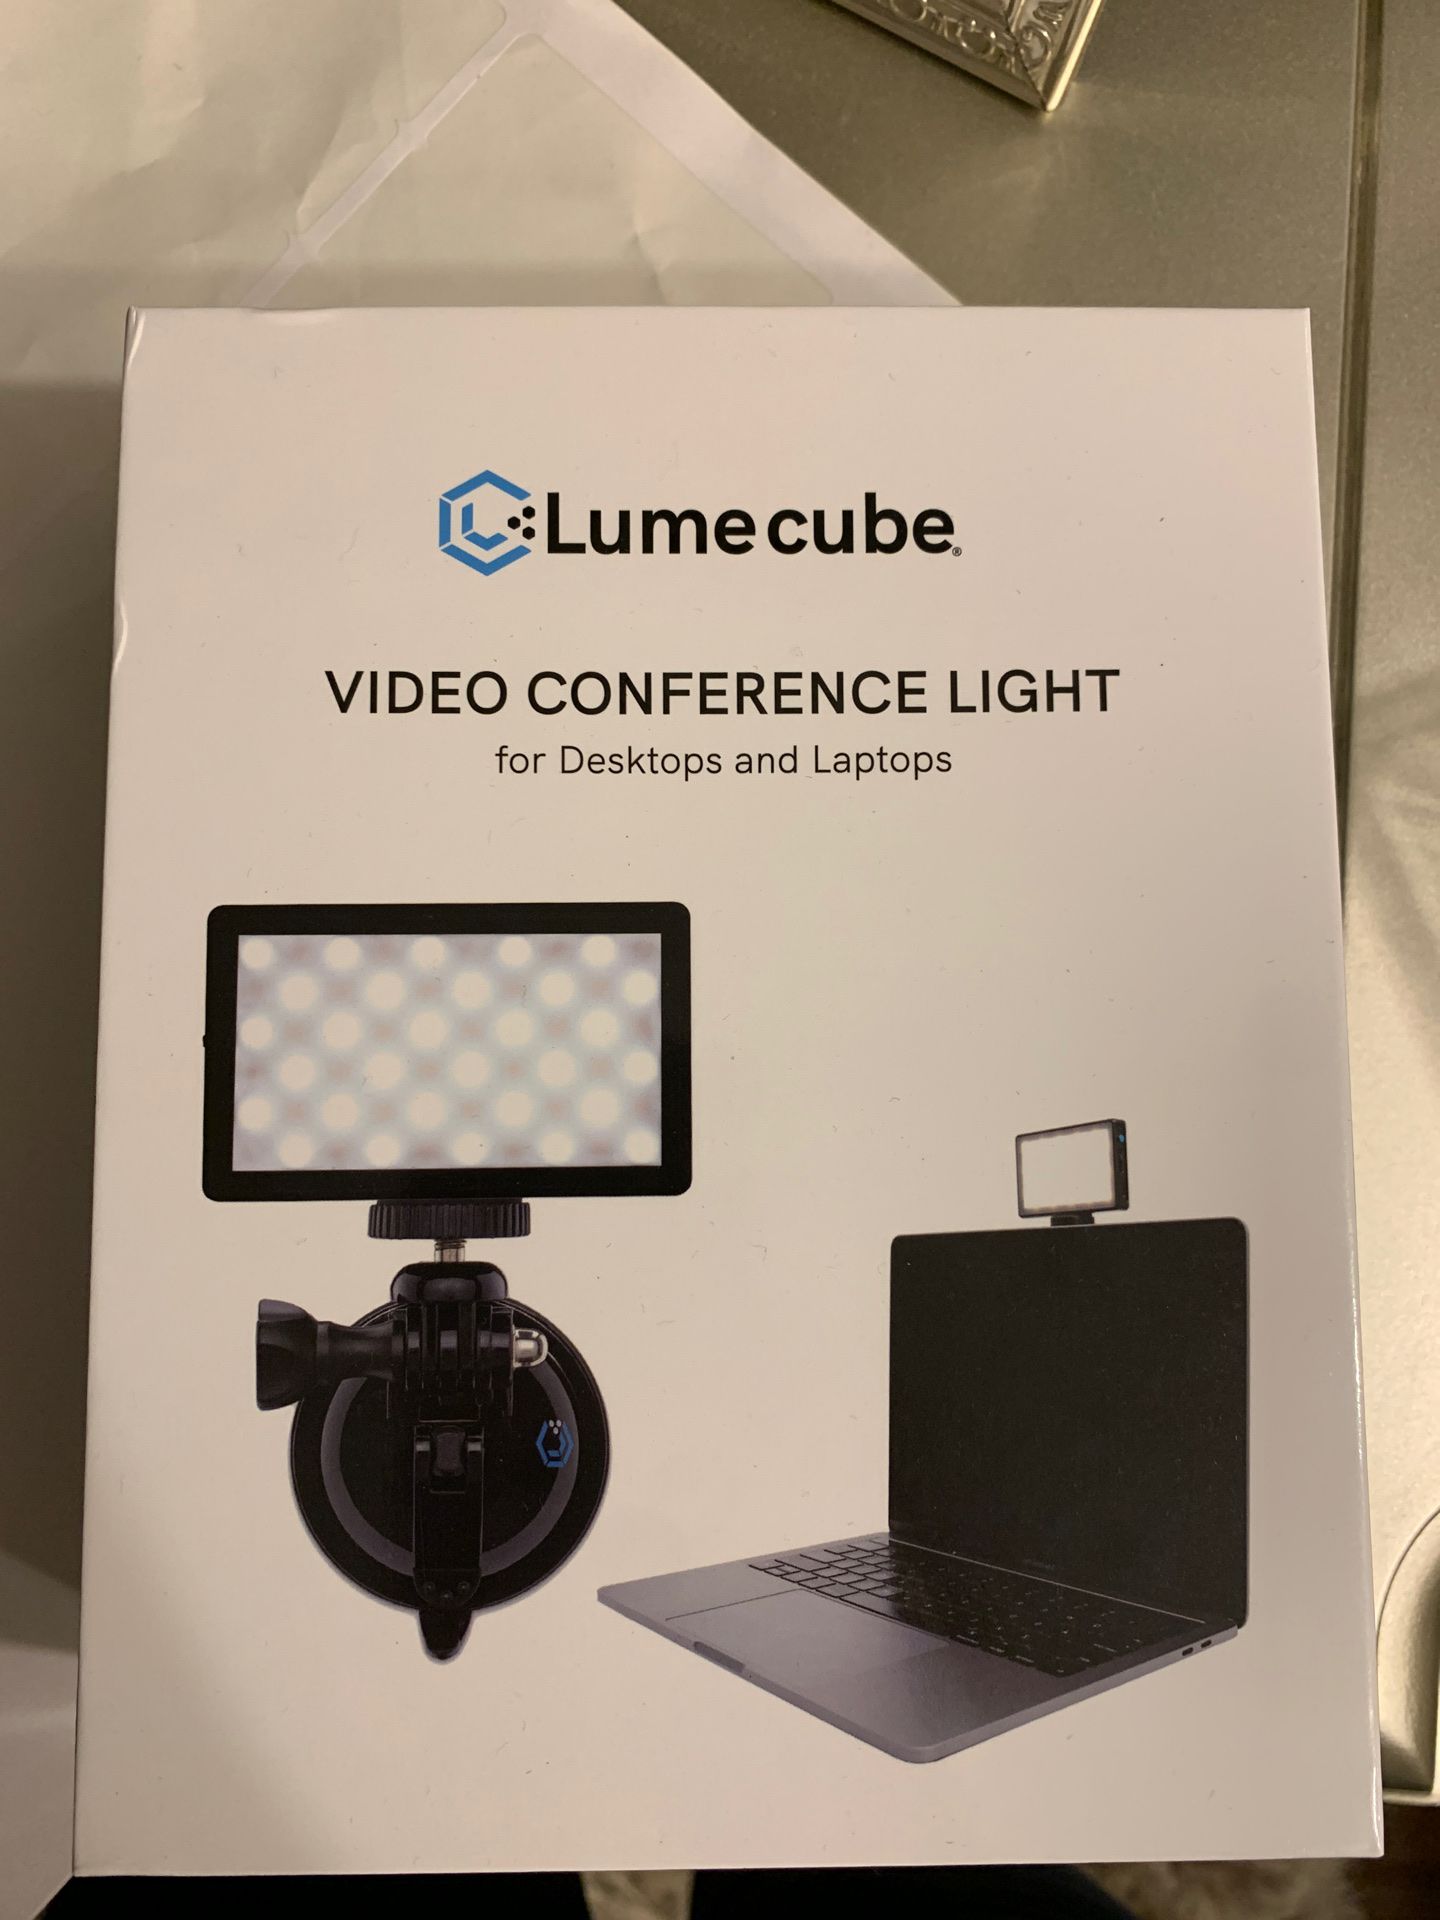 Video conference light